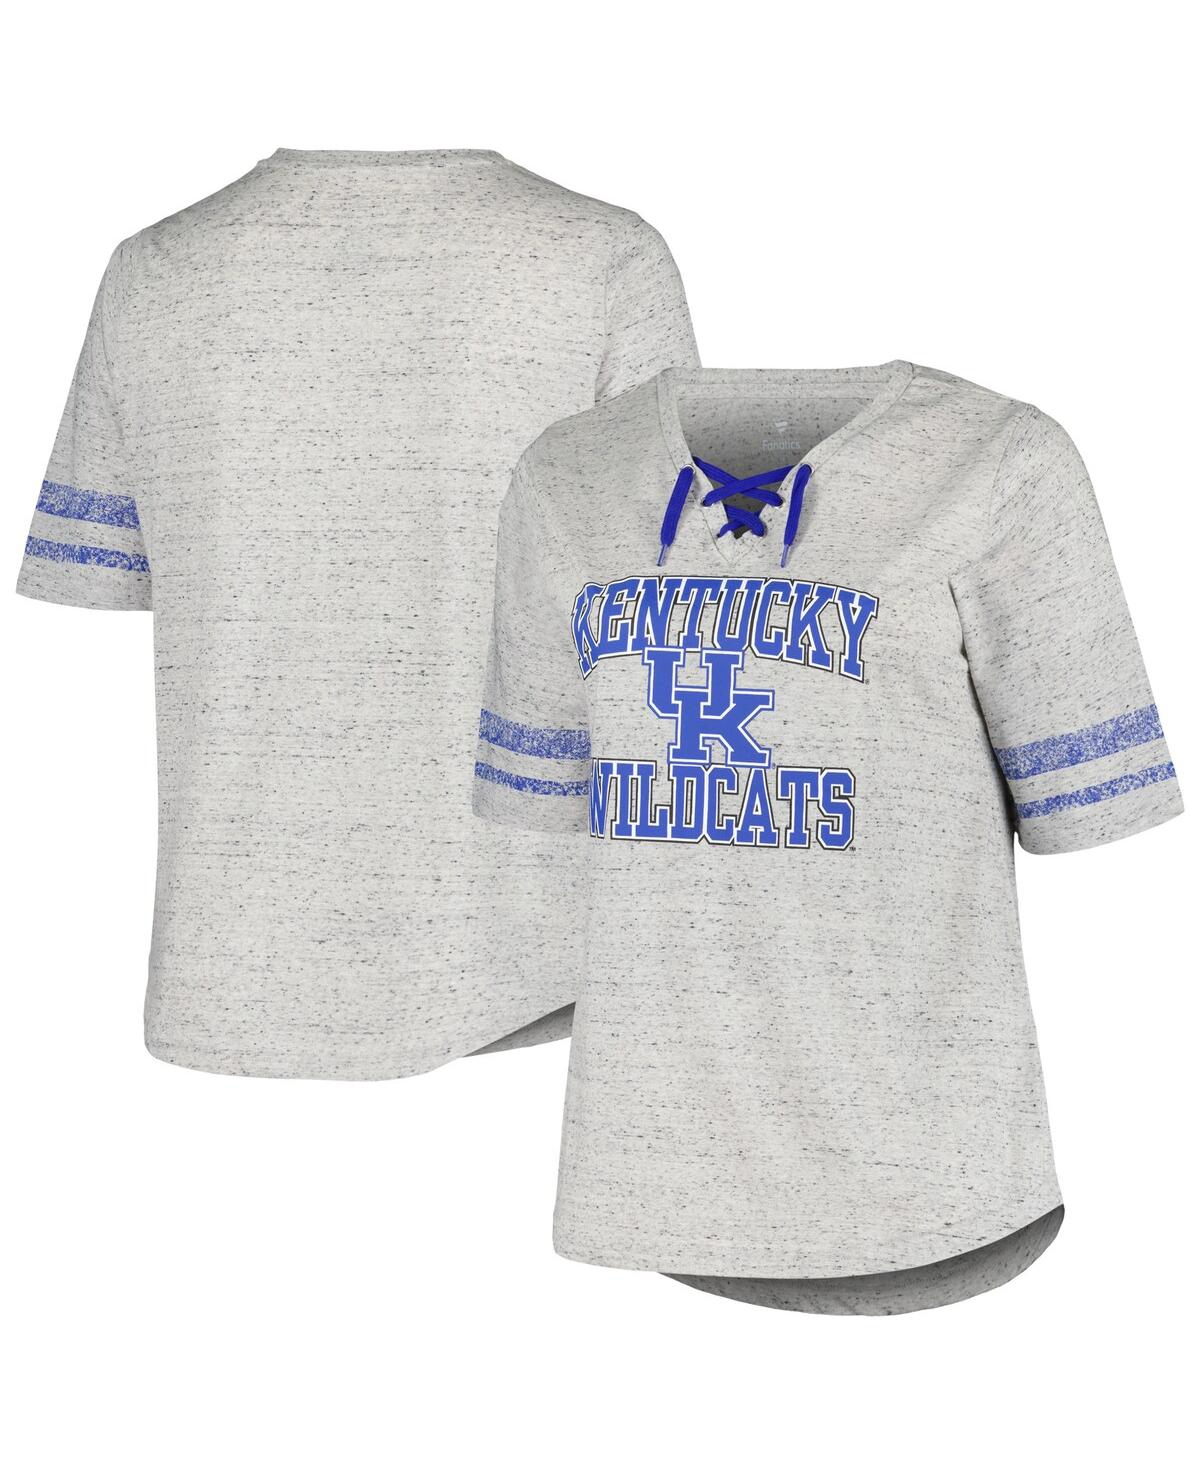 Profile Women's  Heather Gray Distressed Kentucky Wildcats Plus Size Striped Lace-up T-shirt